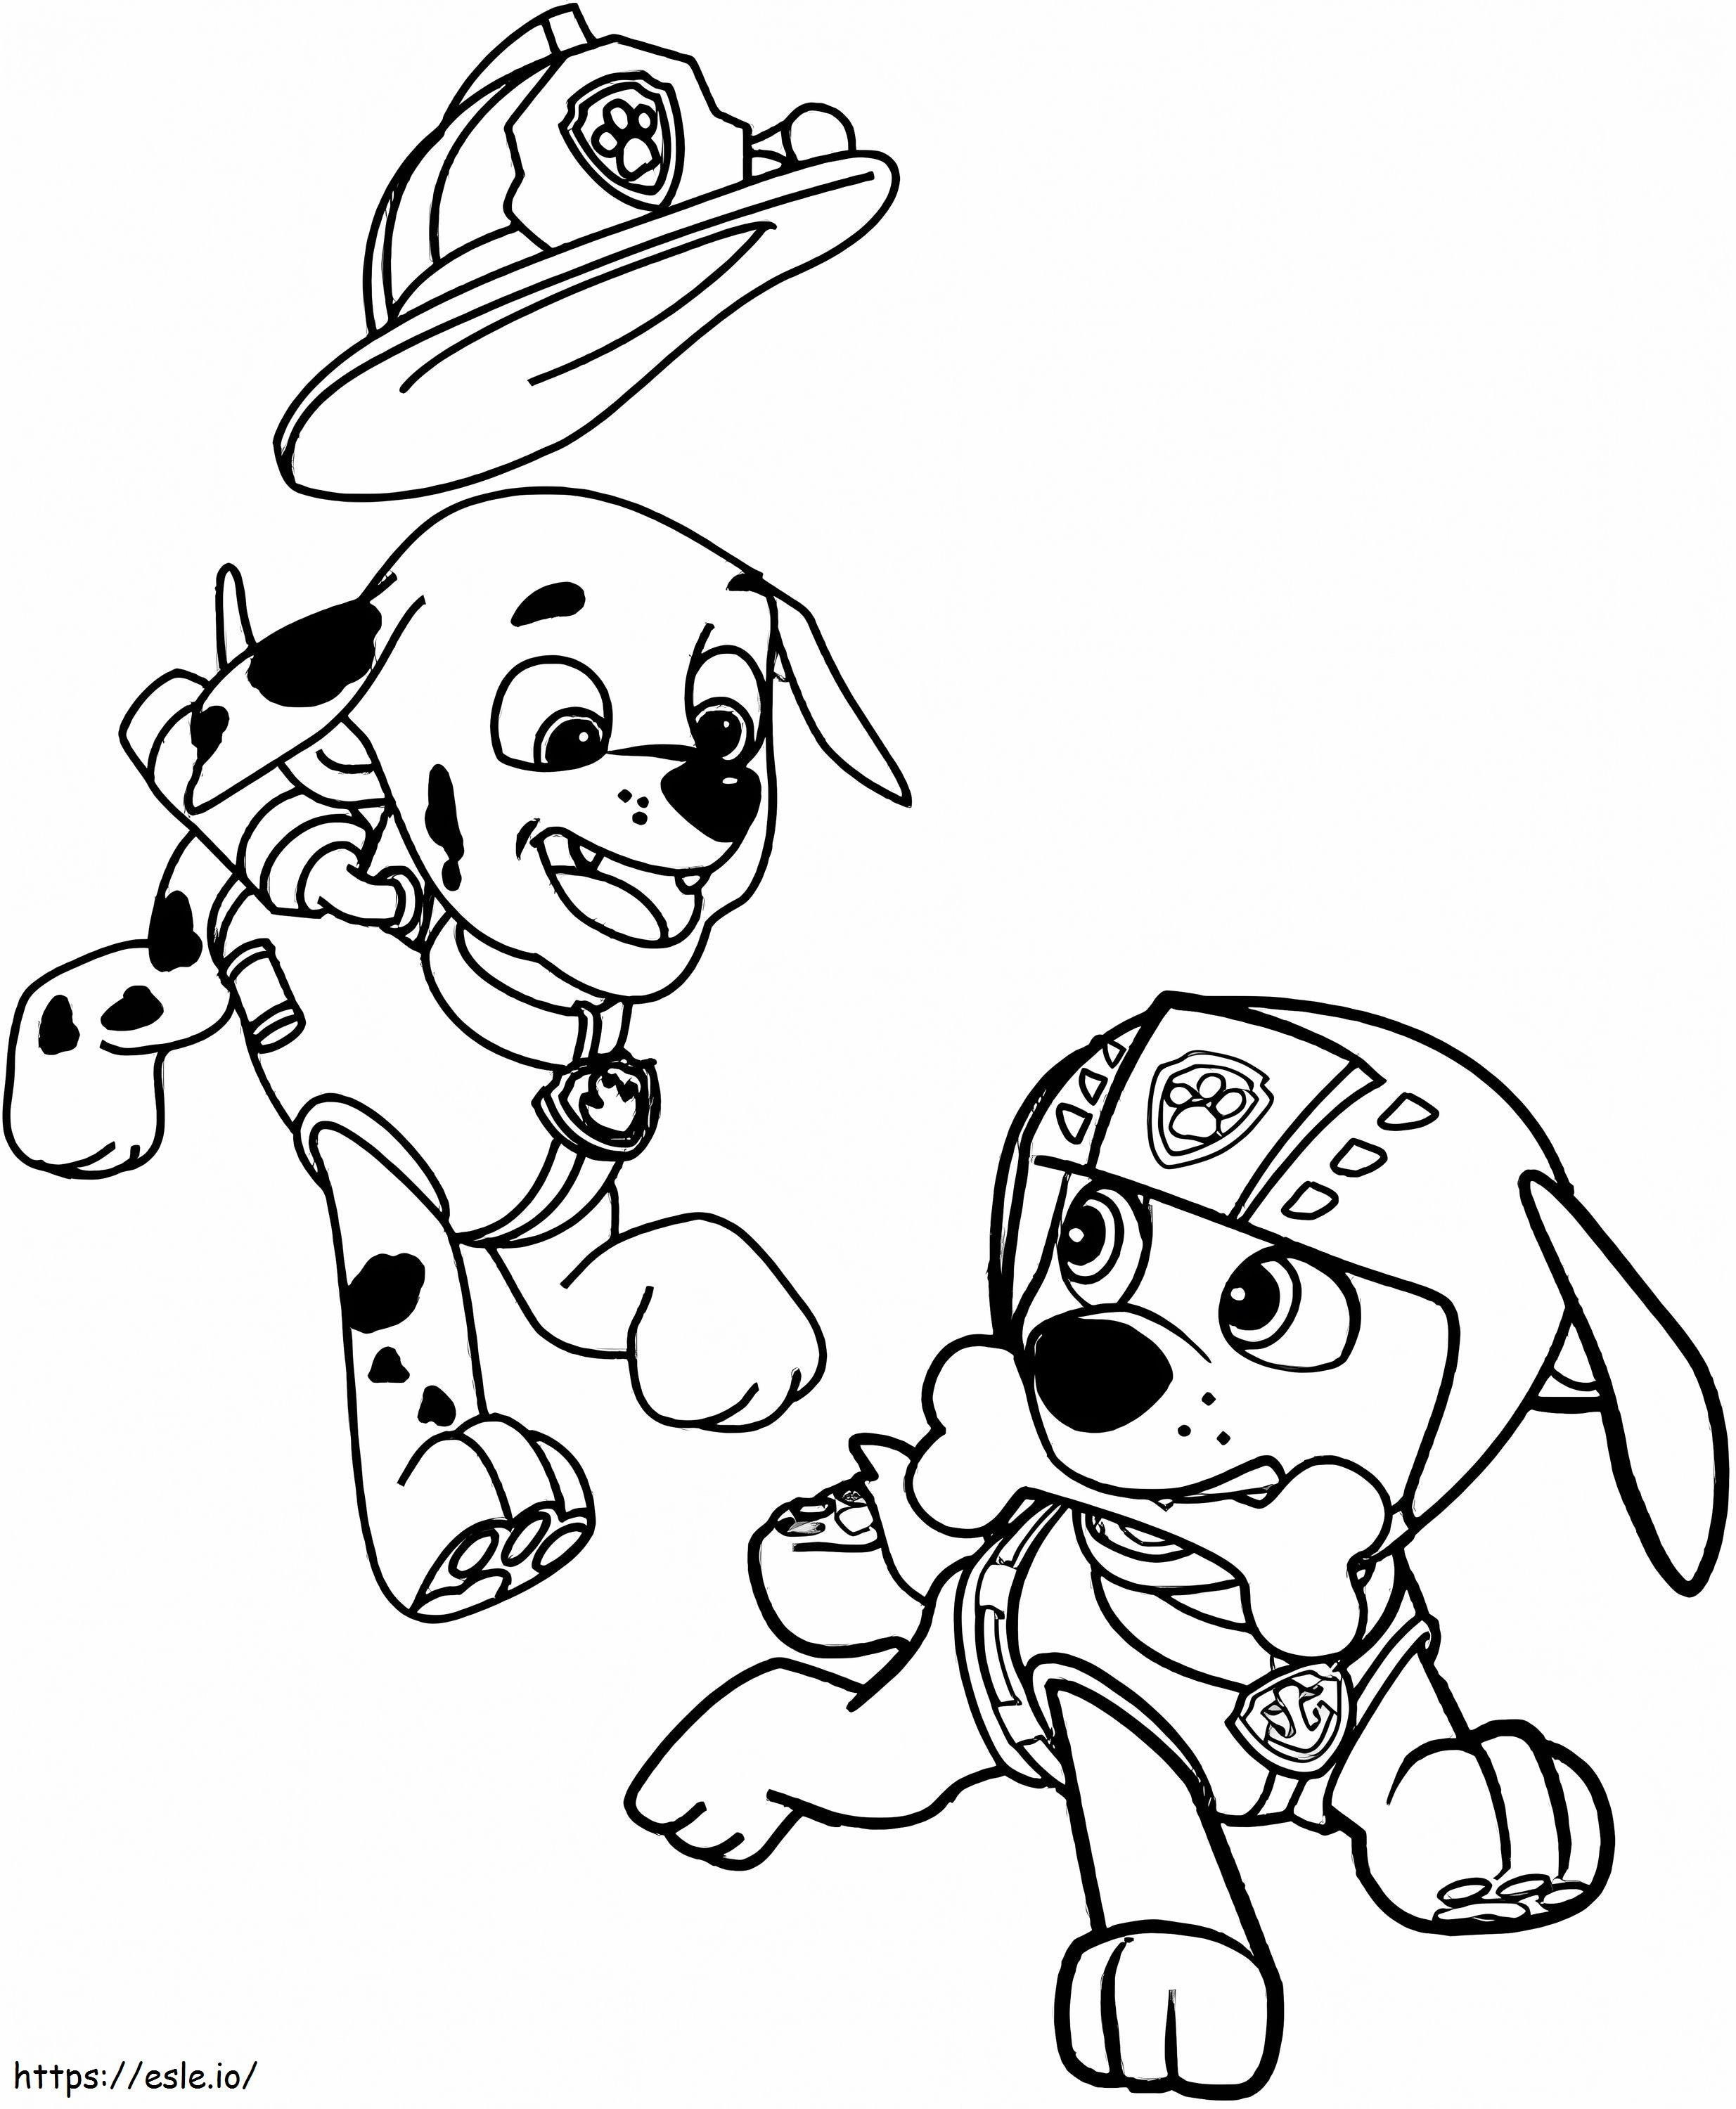 1565660758 Marshall N Zuma A4 coloring page